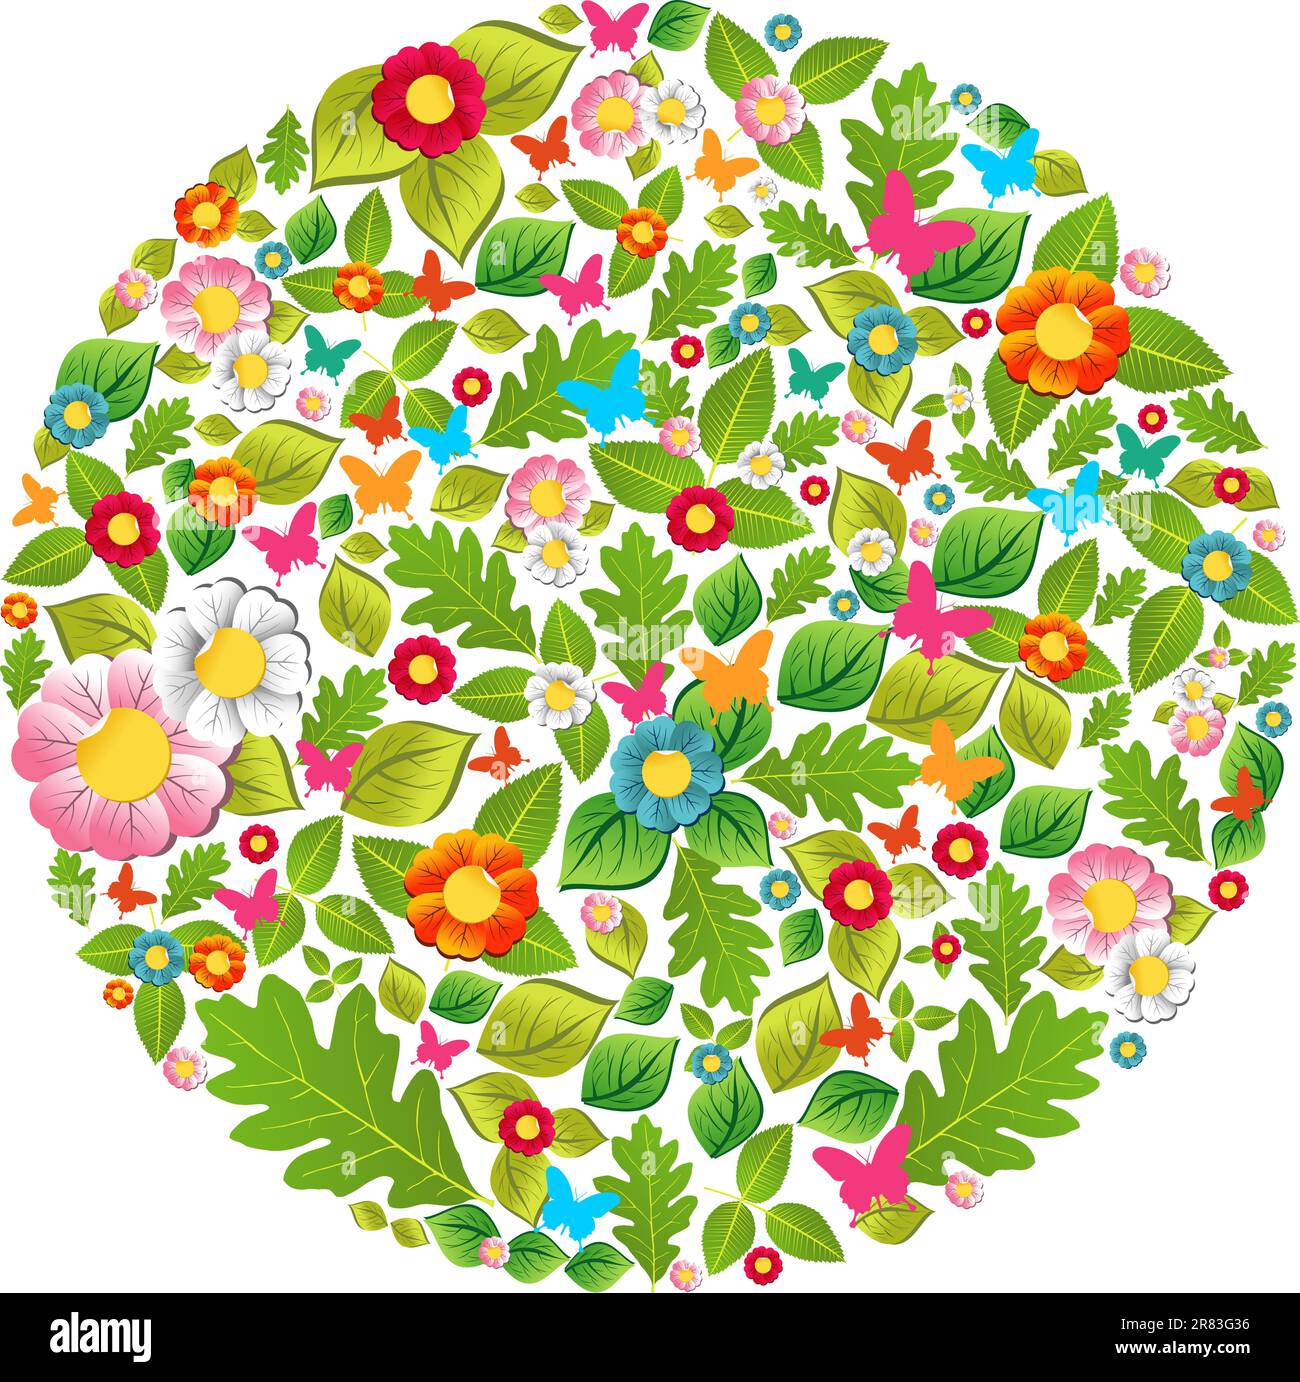 Leaf, flower, butterfly in spring and summer circle. Vector file layered for easy manipulation and custom coloring. Stock Vector